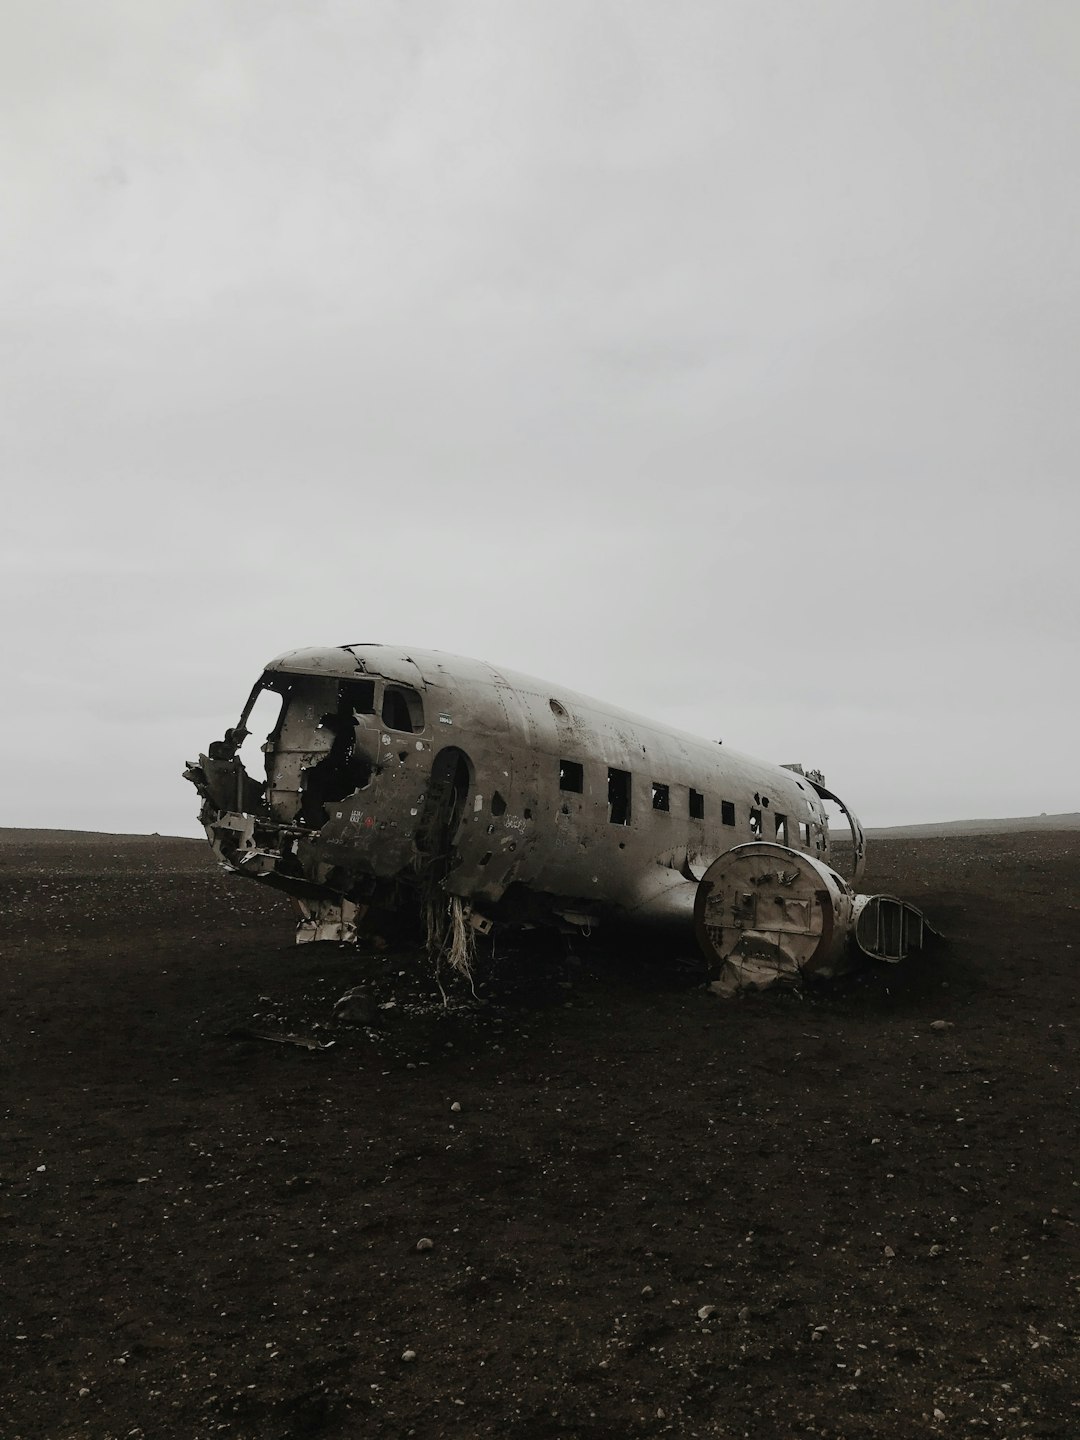 wrecked airplane under gray sky